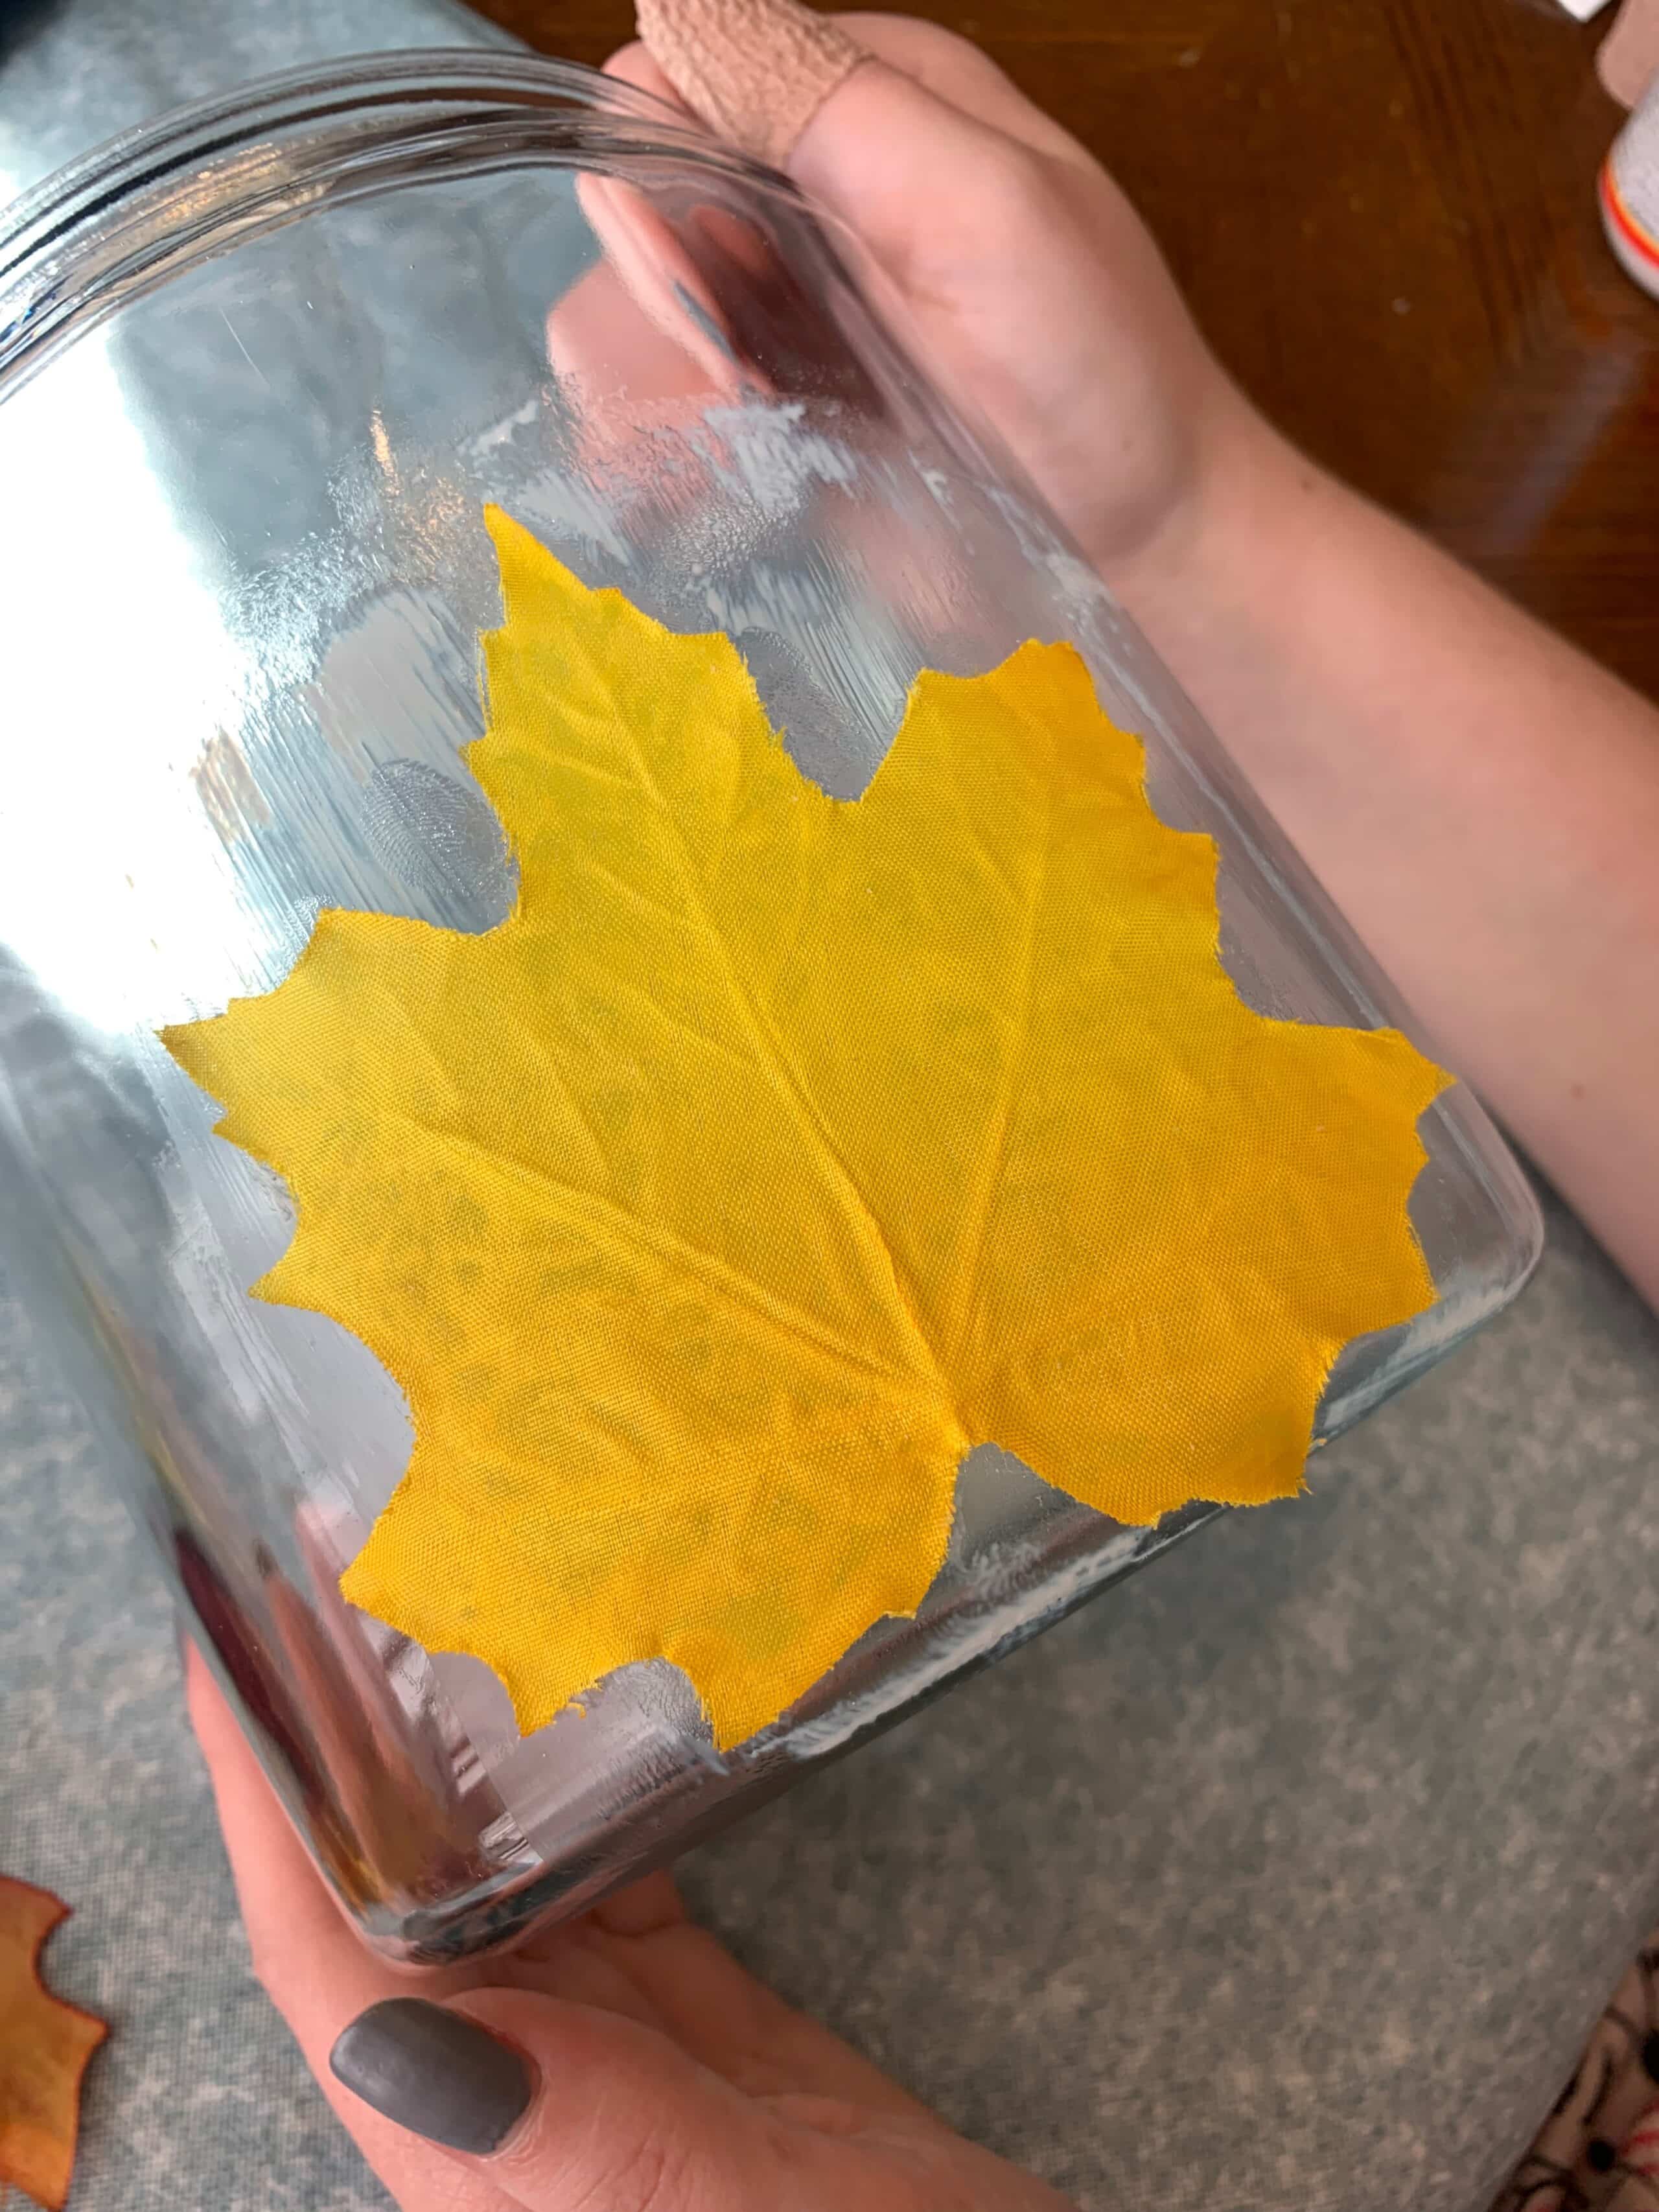 directions for making a fall lantern